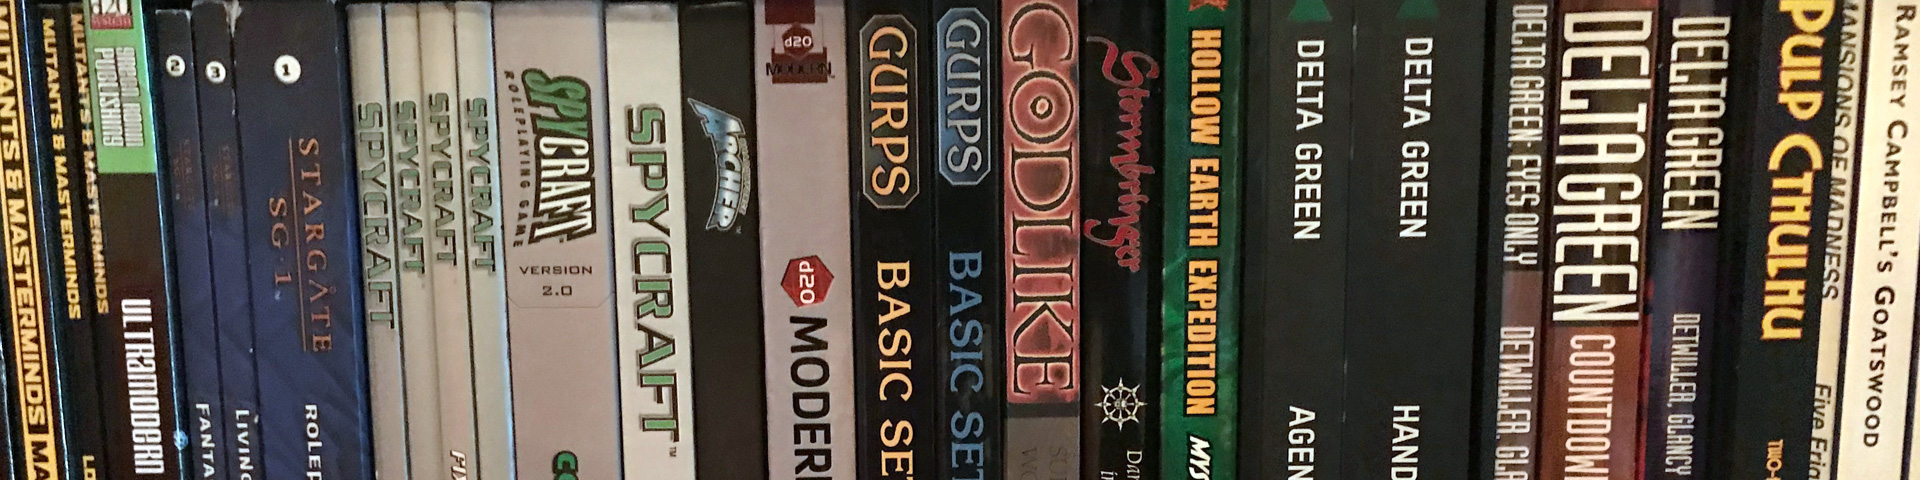 A close up view of the spines of numerous role-playing game books.